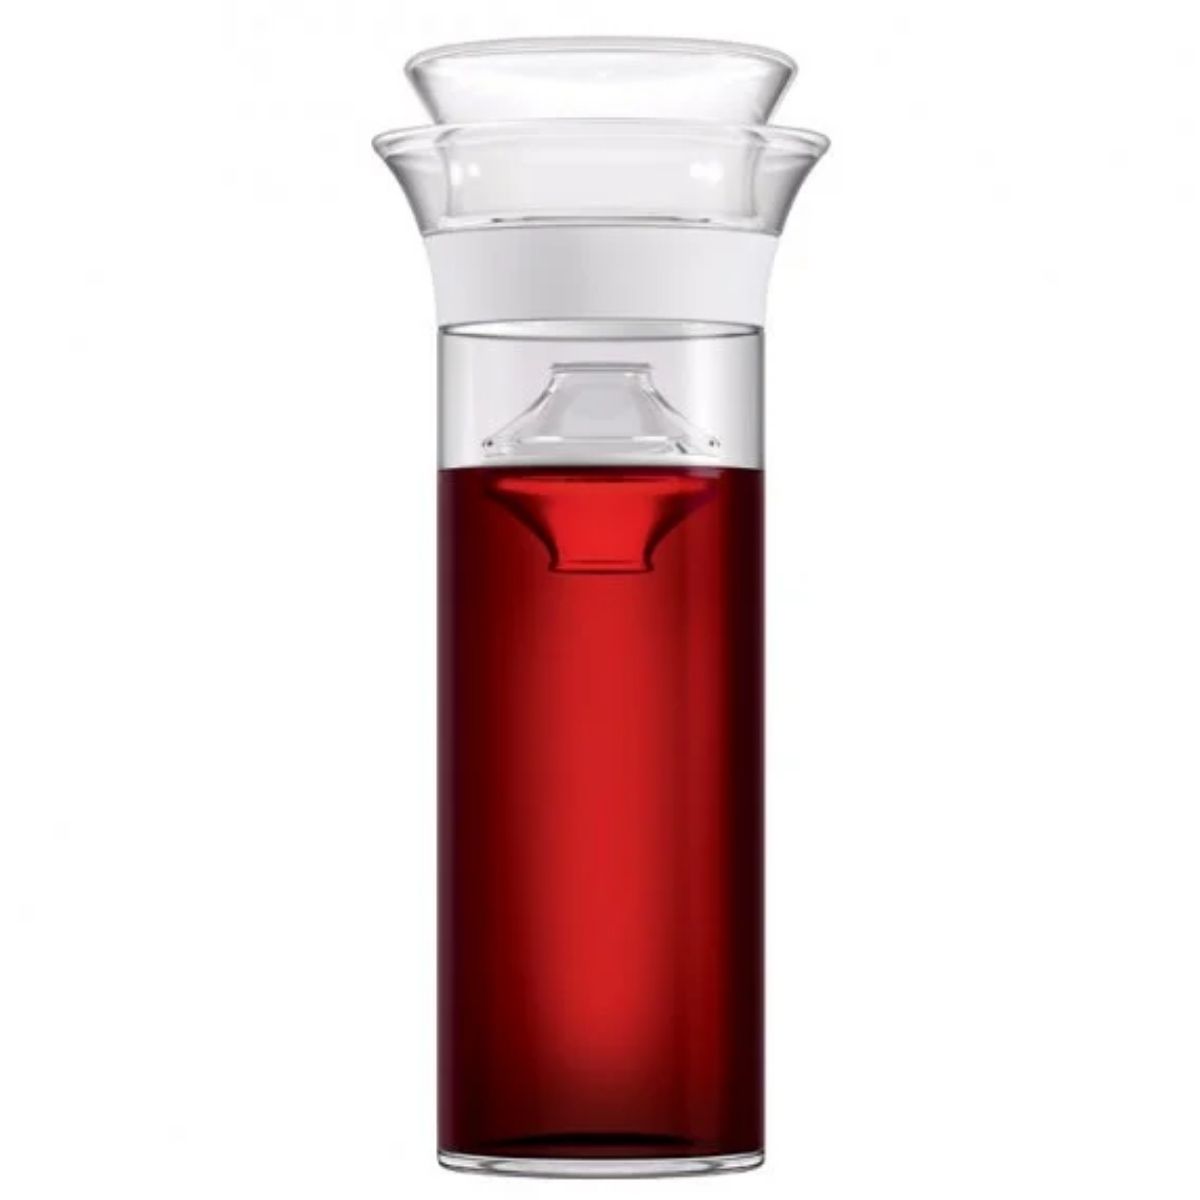 The Best Gifts for Wine Lovers Option: Glass Wine Saver Carafe